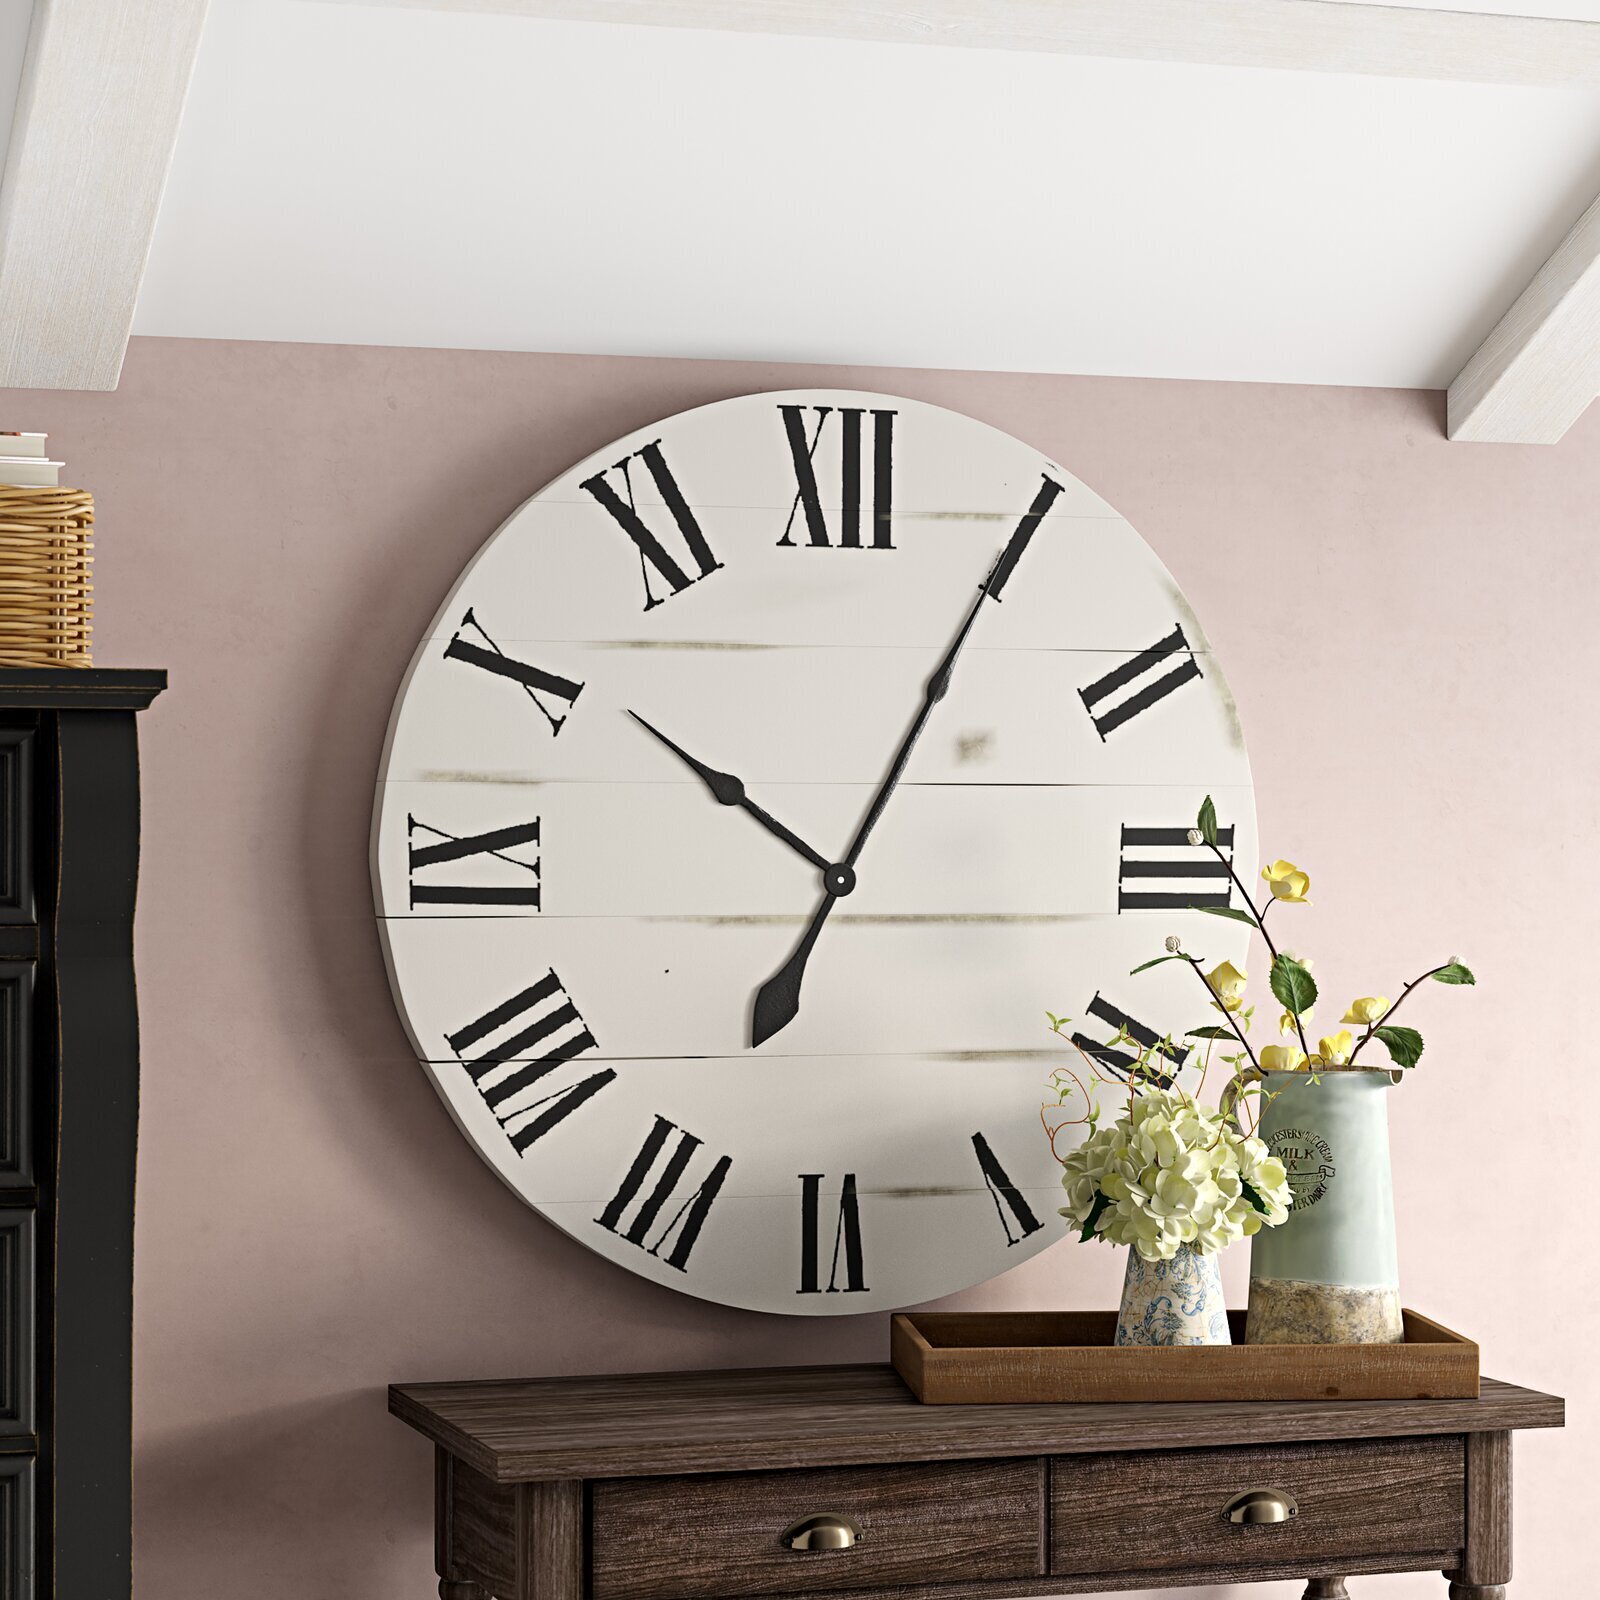 Oversized antique wall clock